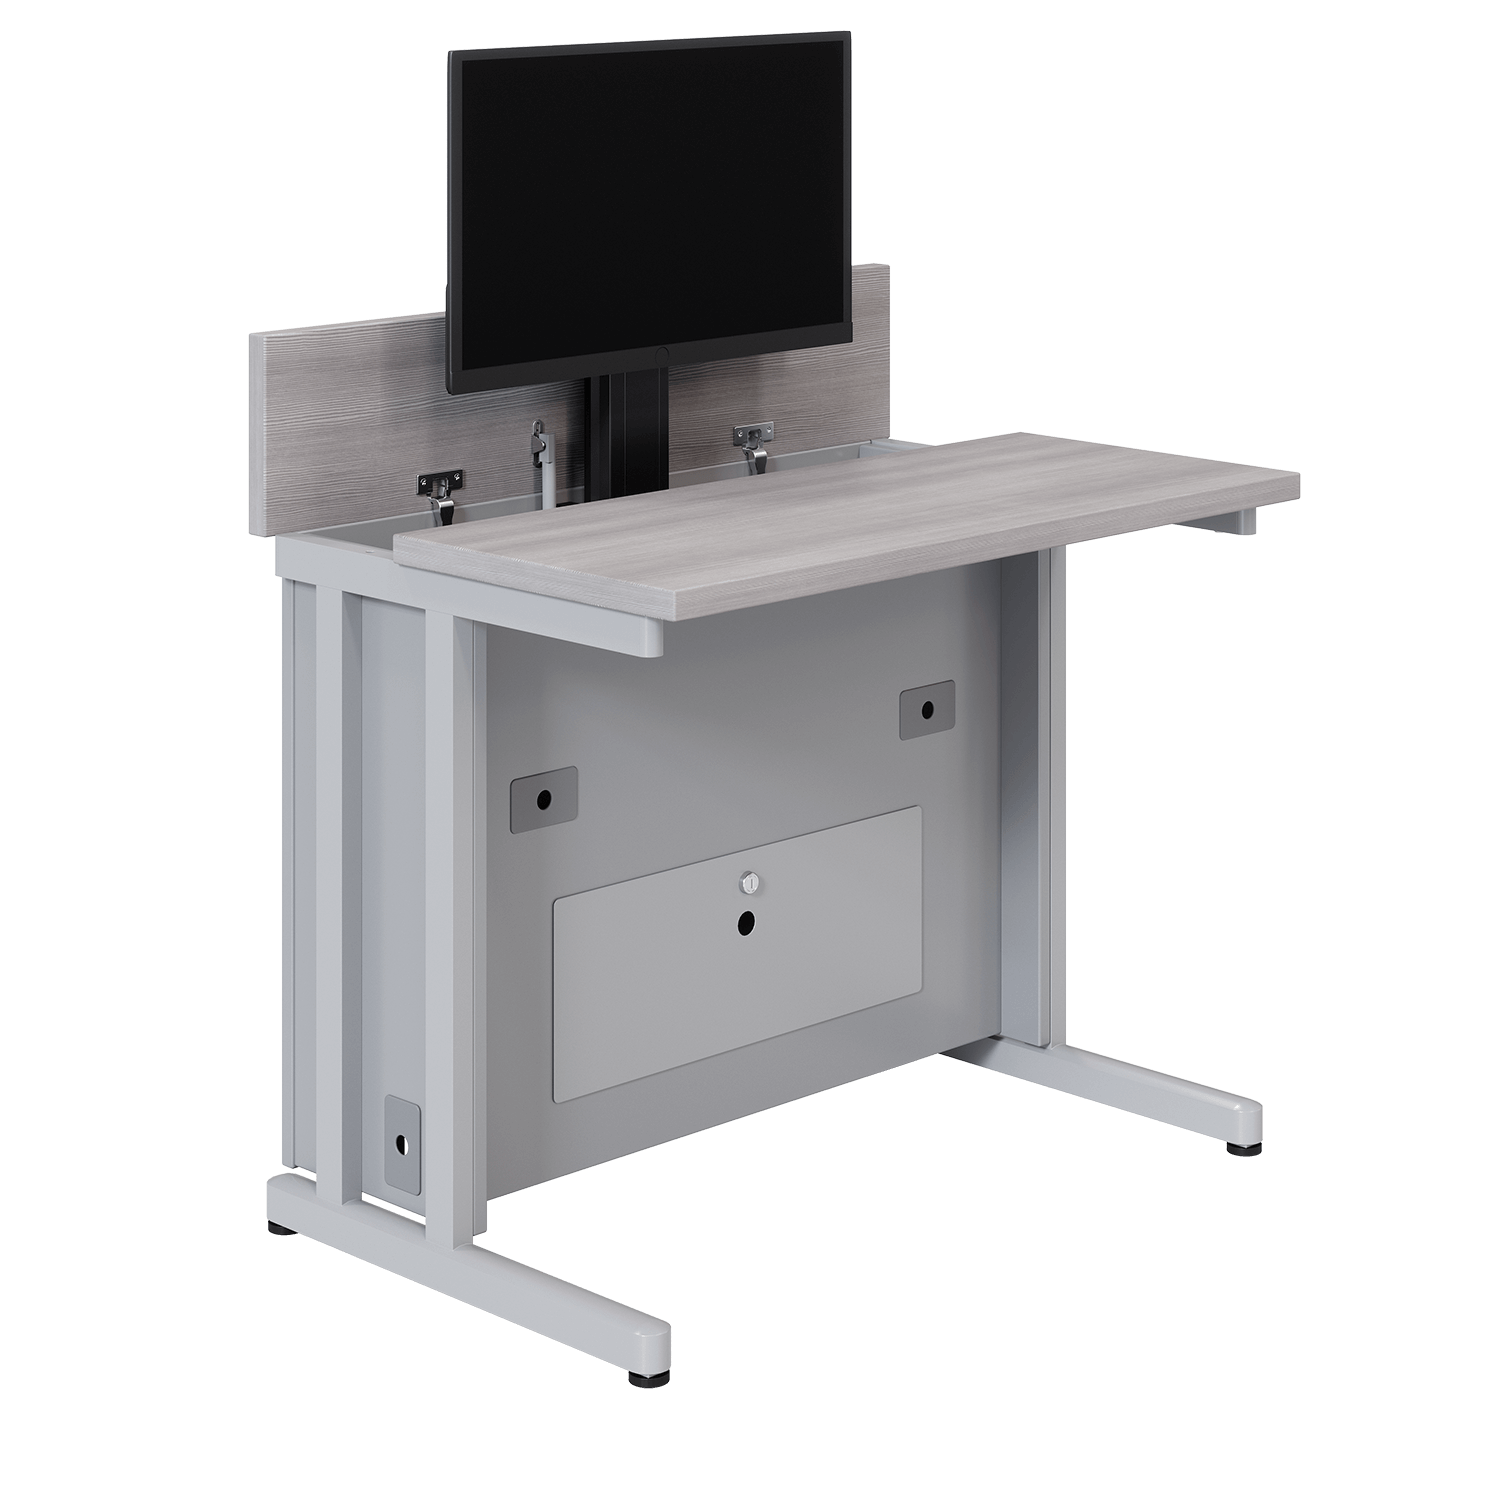 The Monitor Stand Drawer Hide Small Workplace Accessories